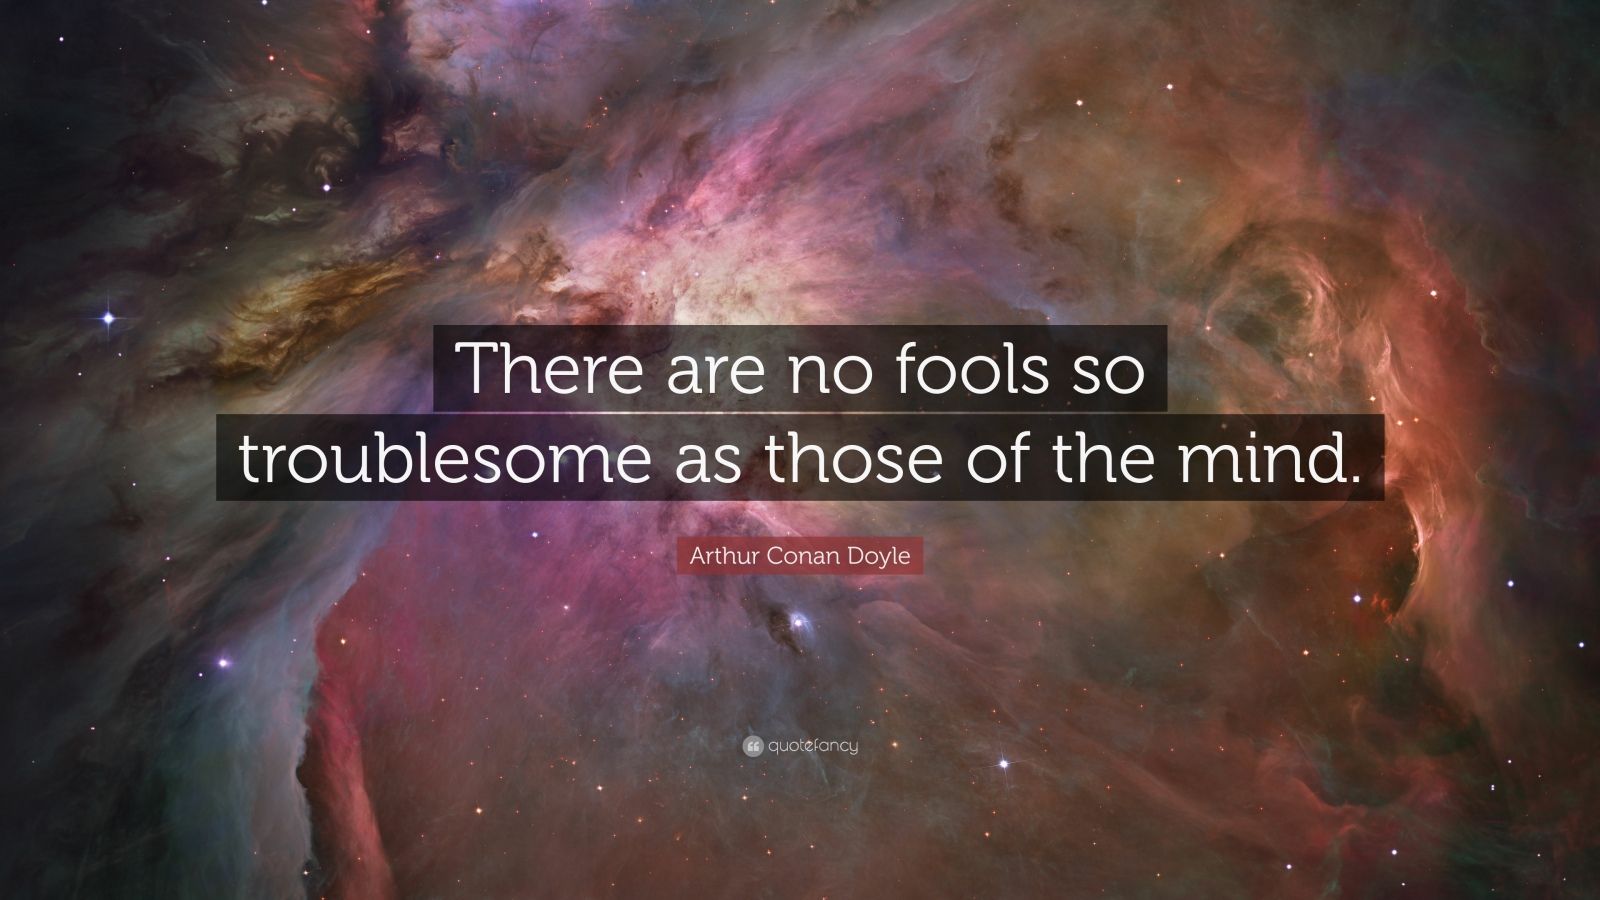 Arthur Conan Doyle Quote There Are No Fools So Troublesome As Those Of The Mind